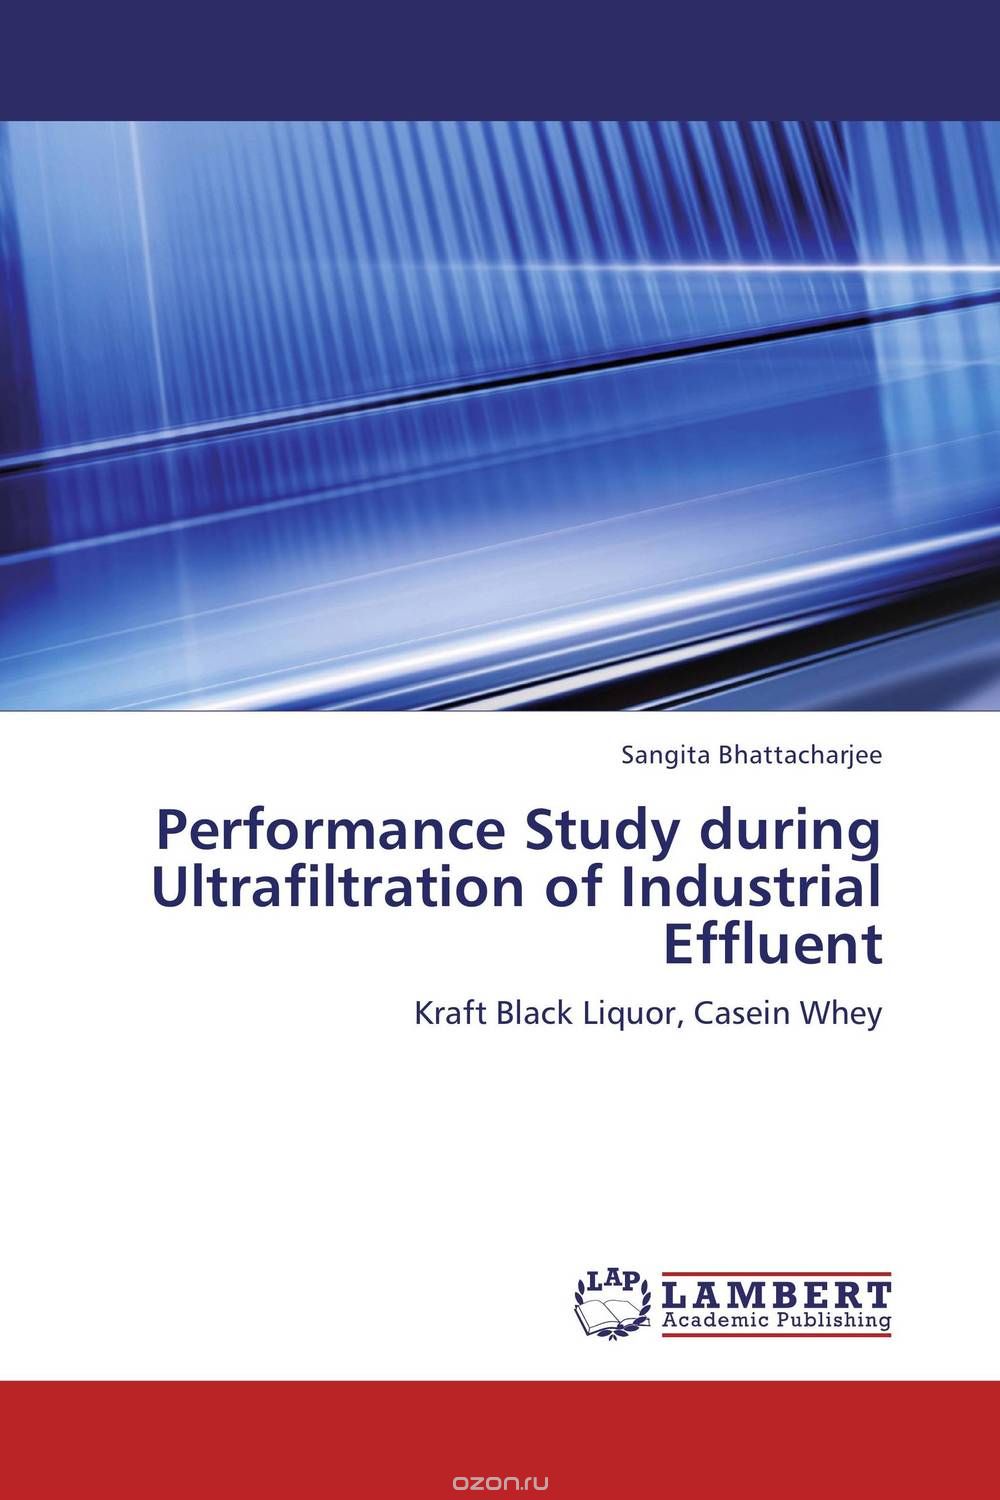 Performance Study during Ultrafiltration of Industrial Effluent